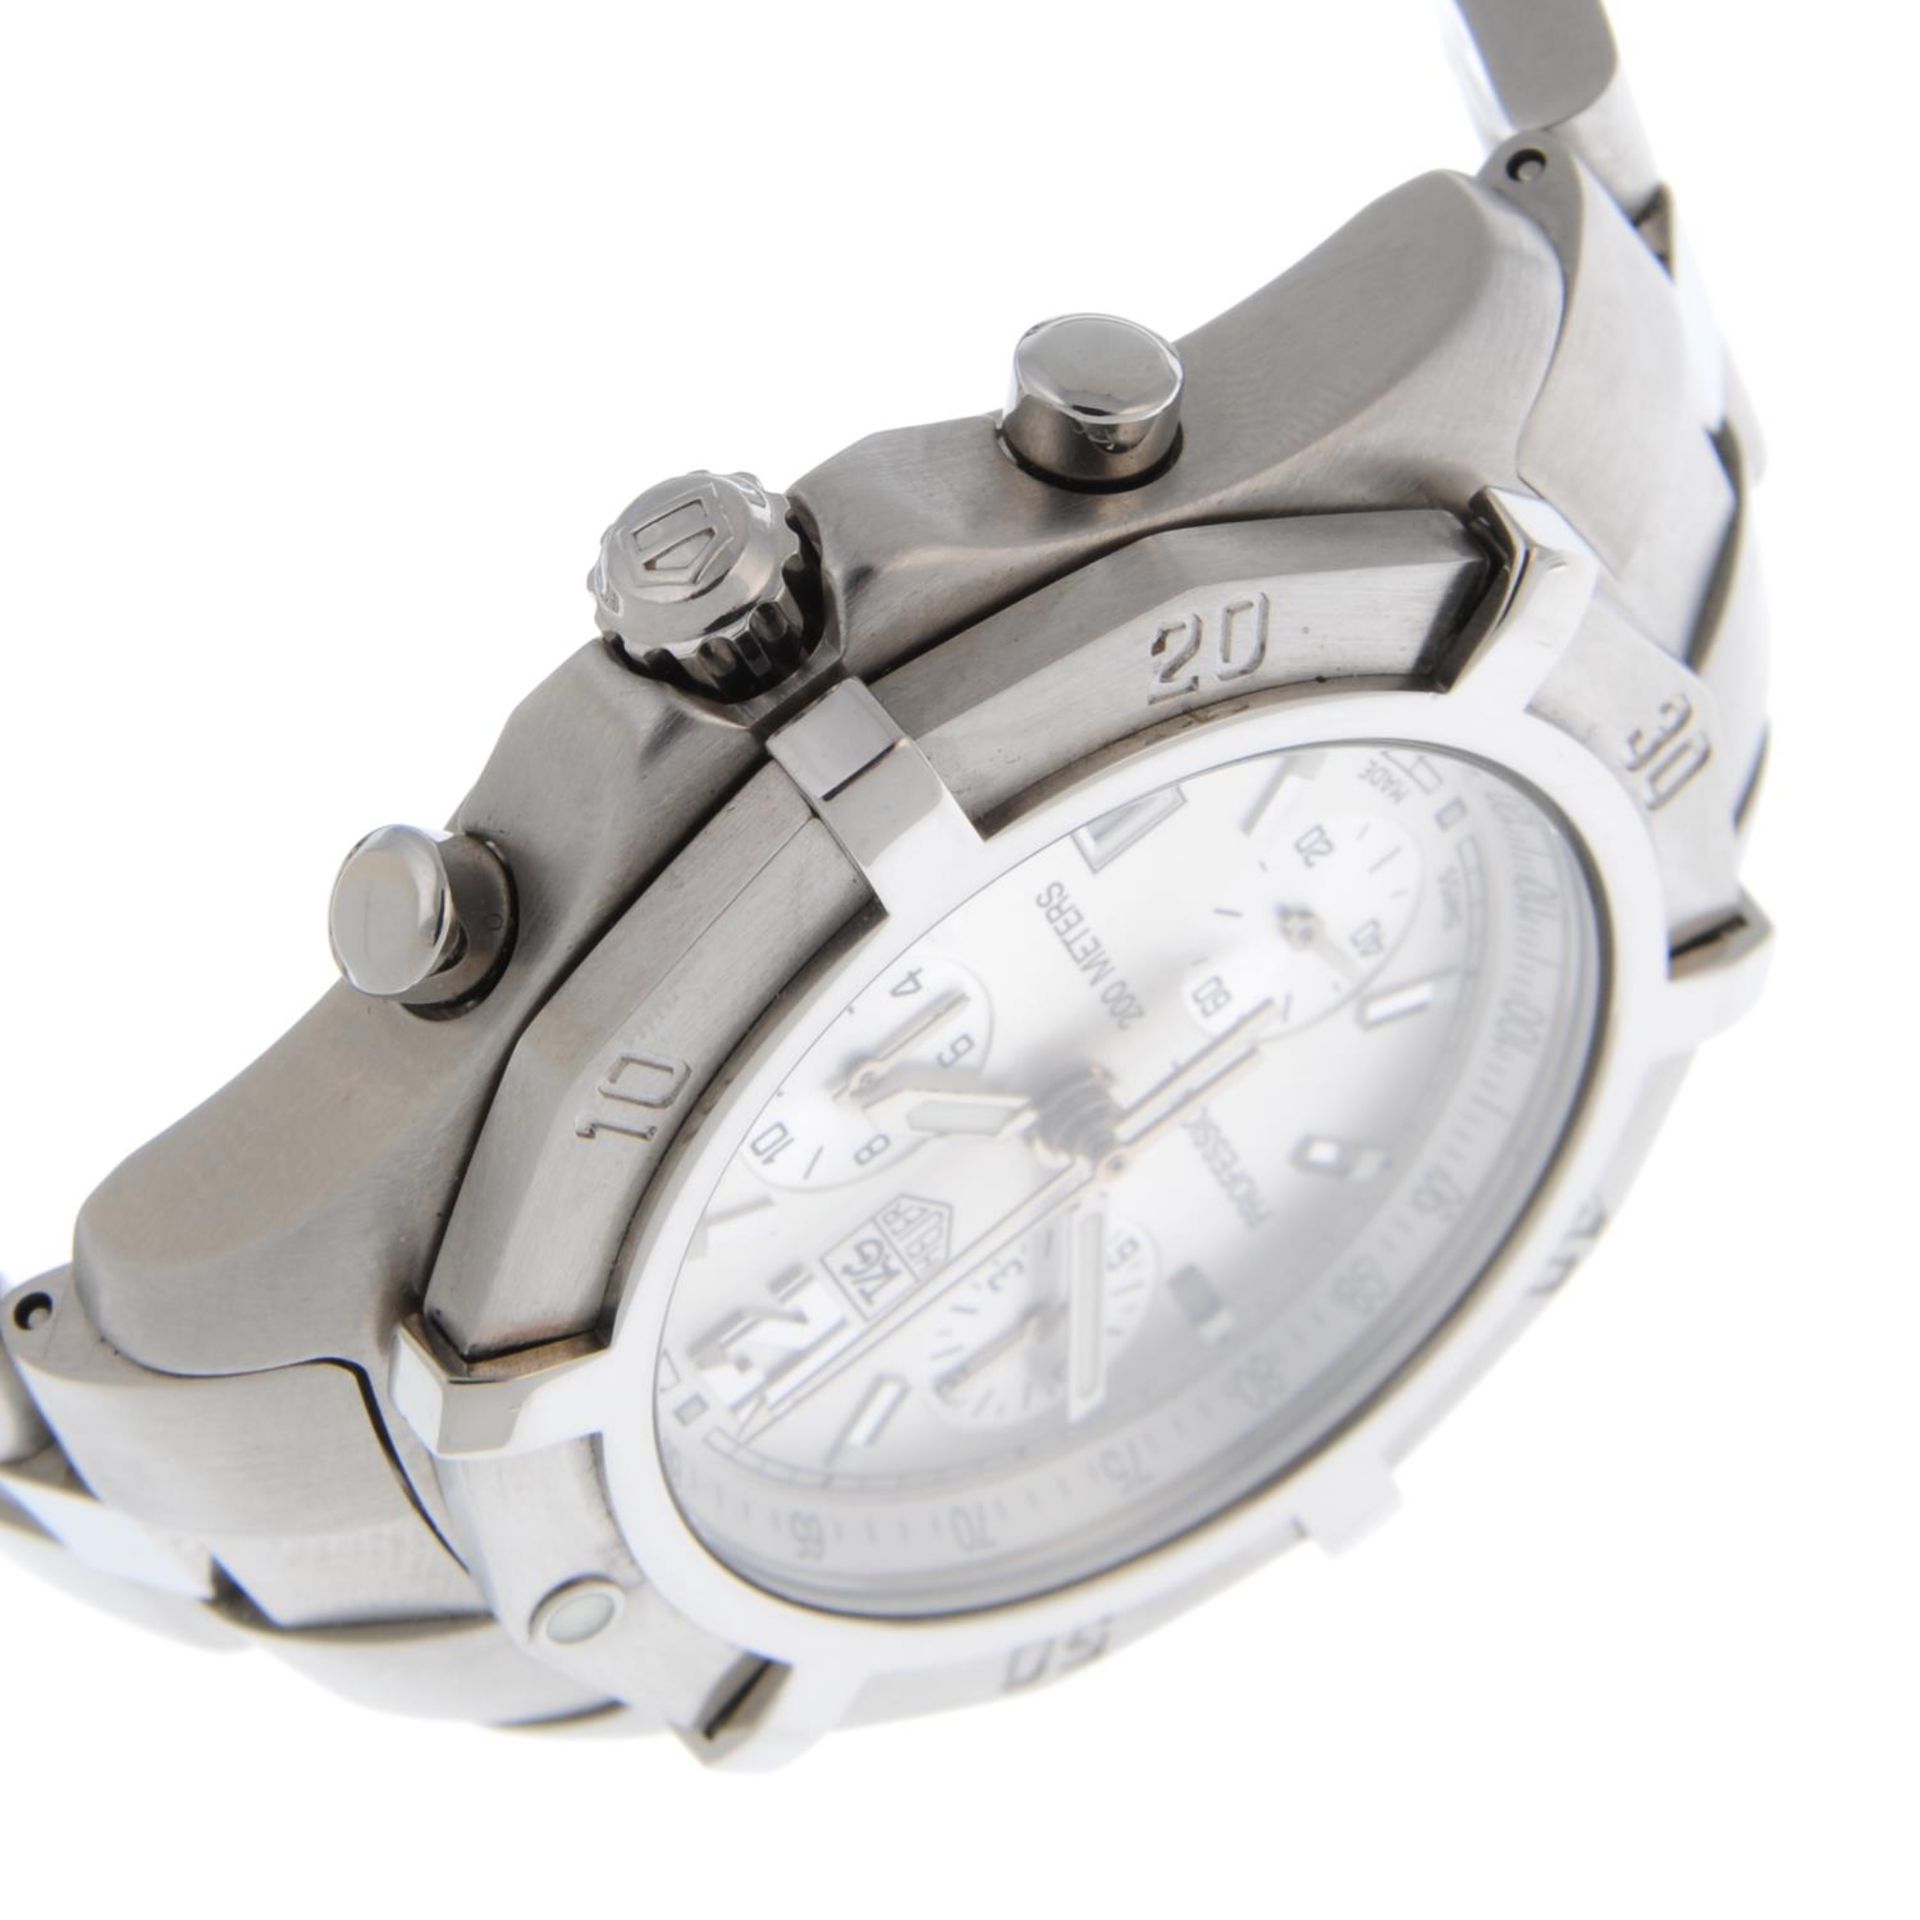 TAG HEUER - a 2000 Exclusive chronograph bracelet watch. - Image 3 of 4